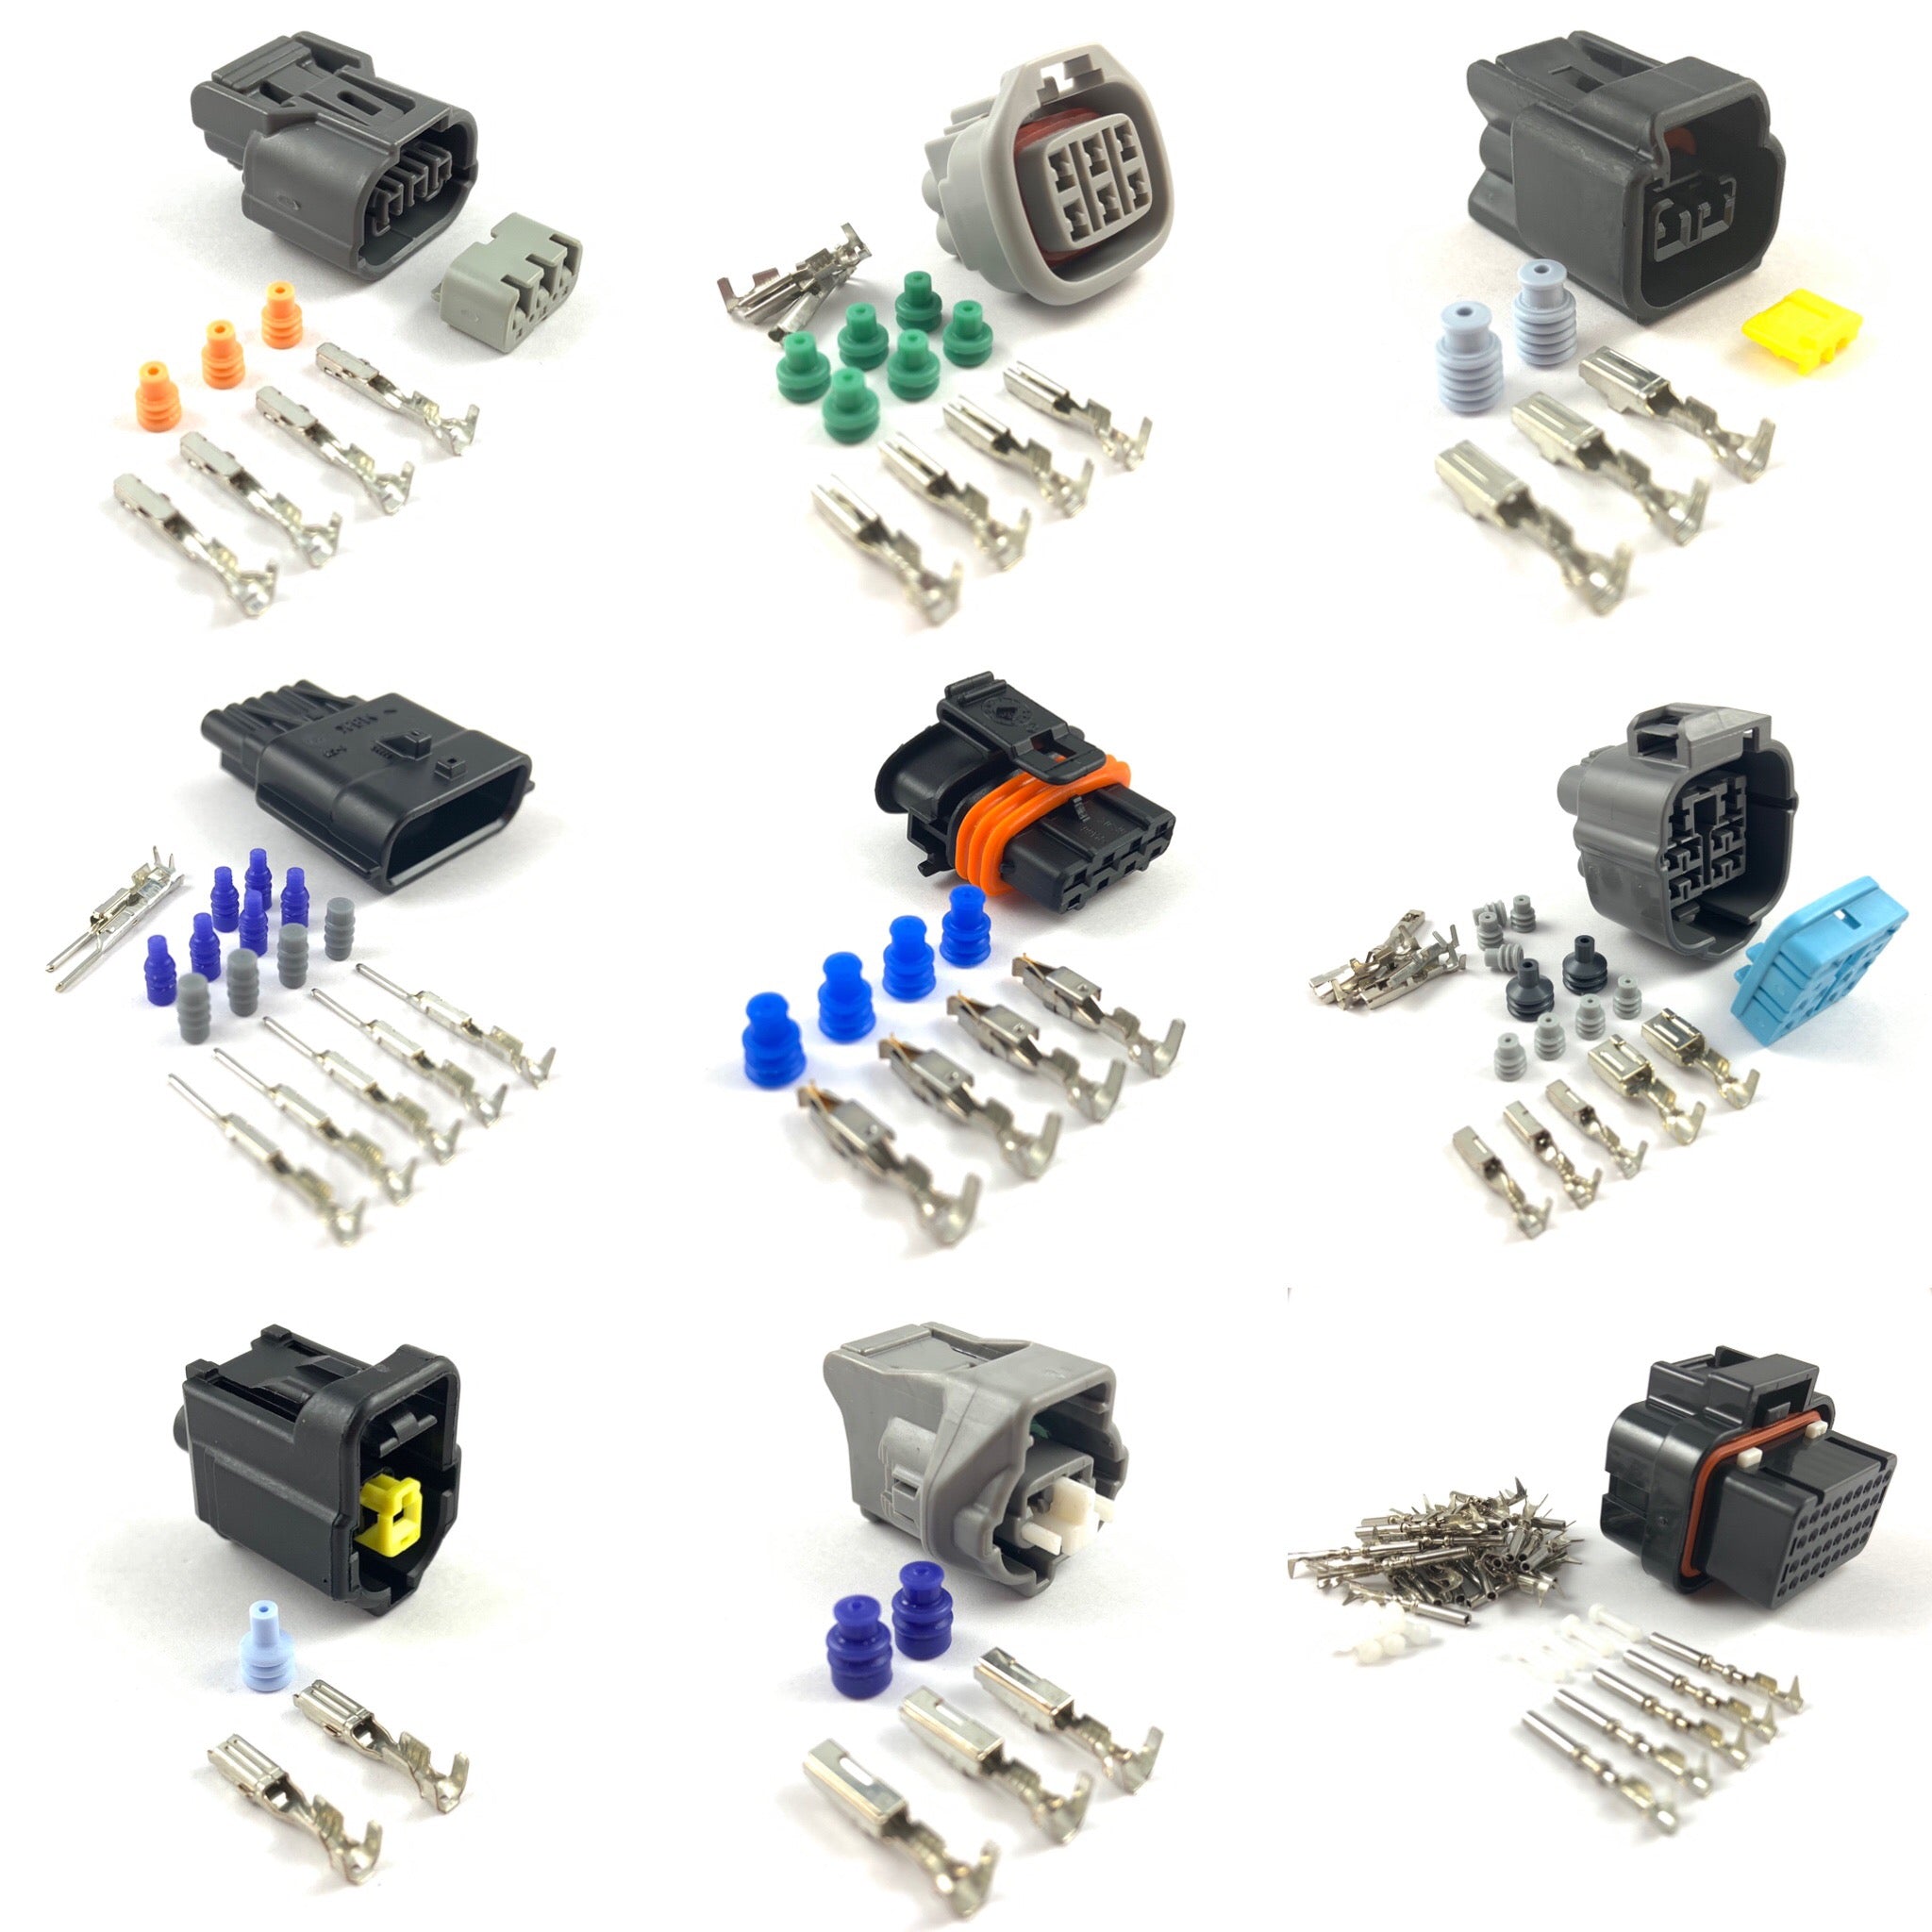 All OEM Connector Kits